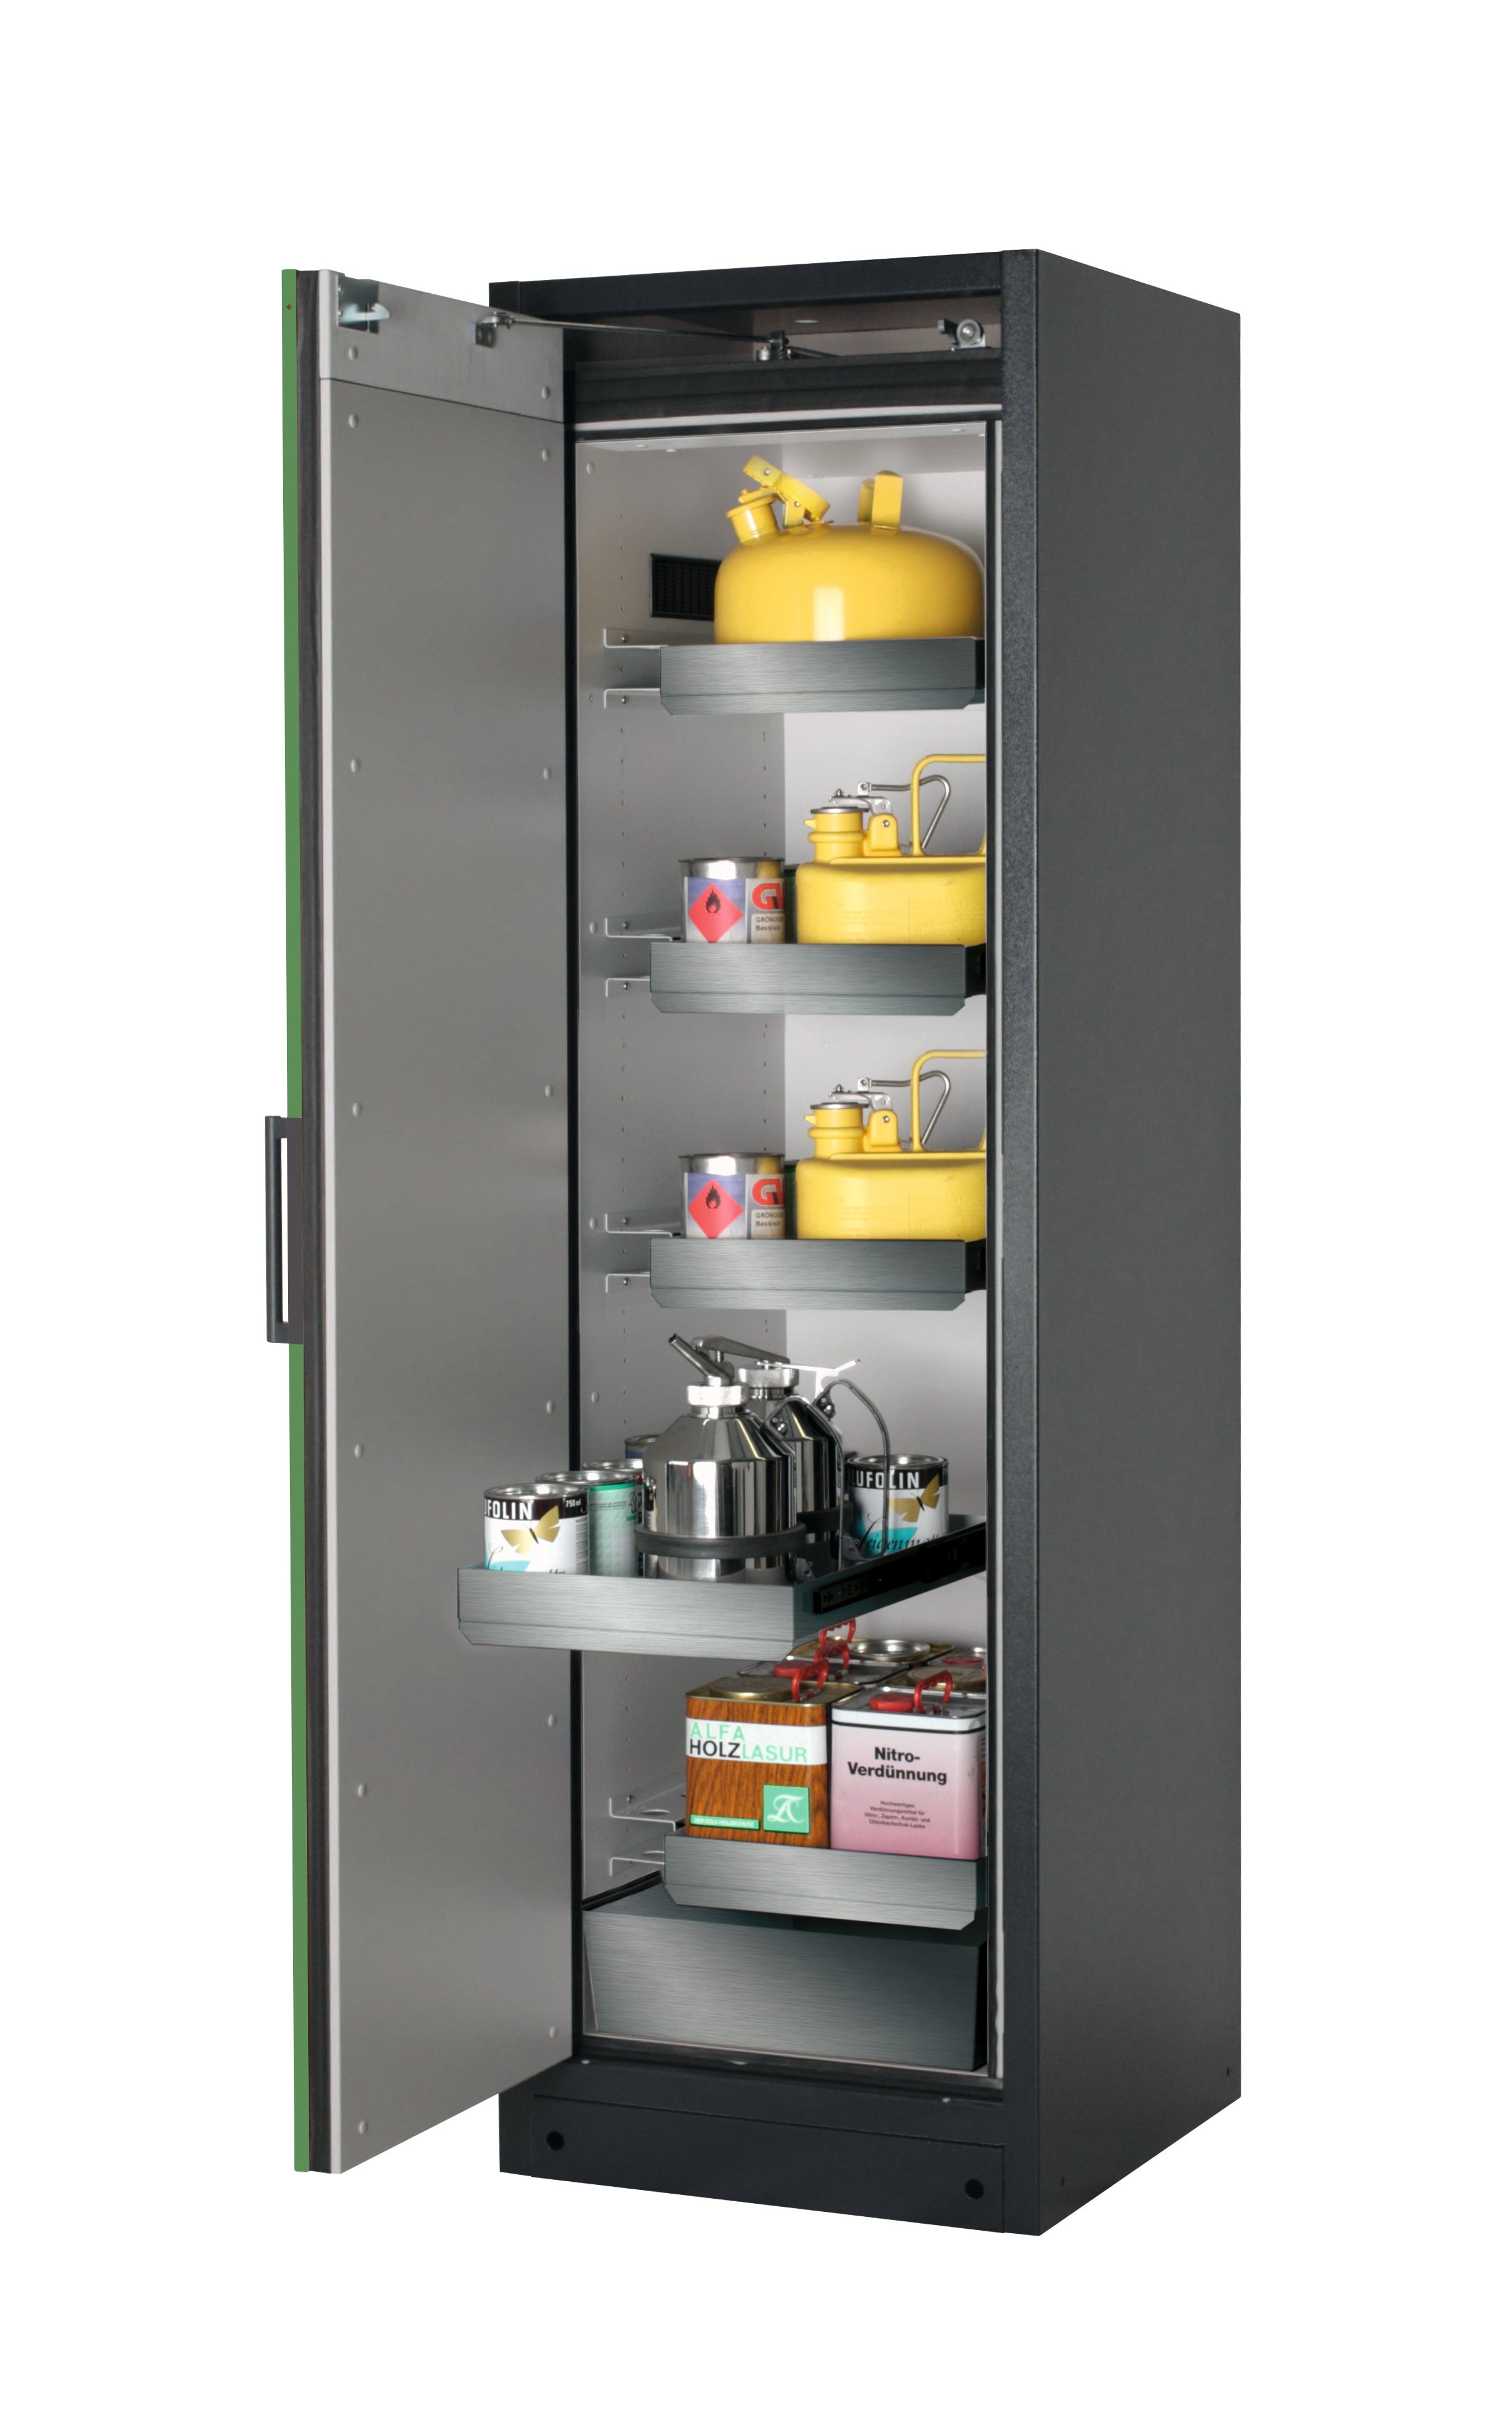 Type 90 safety storage cabinet Q-CLASSIC-90 model Q90.195.060 in reseda green RAL 6011 with 4x drawer (standard) (stainless steel 1.4301),